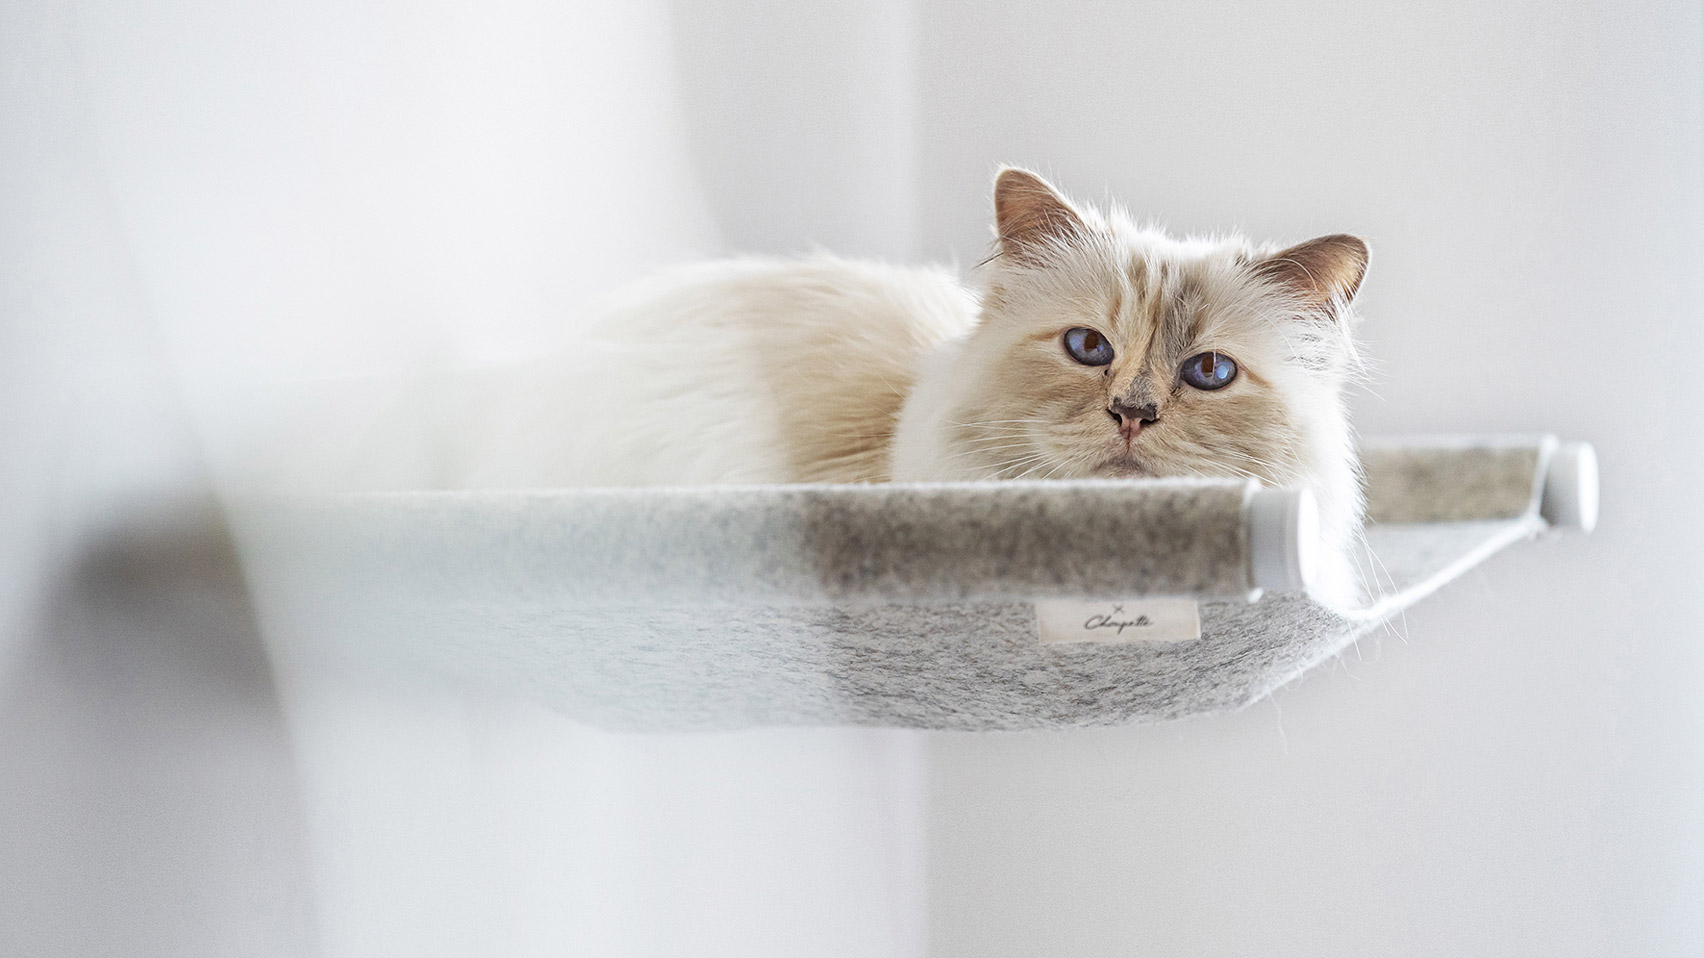 Choupette models the Swing hammock bed by LucyBalu